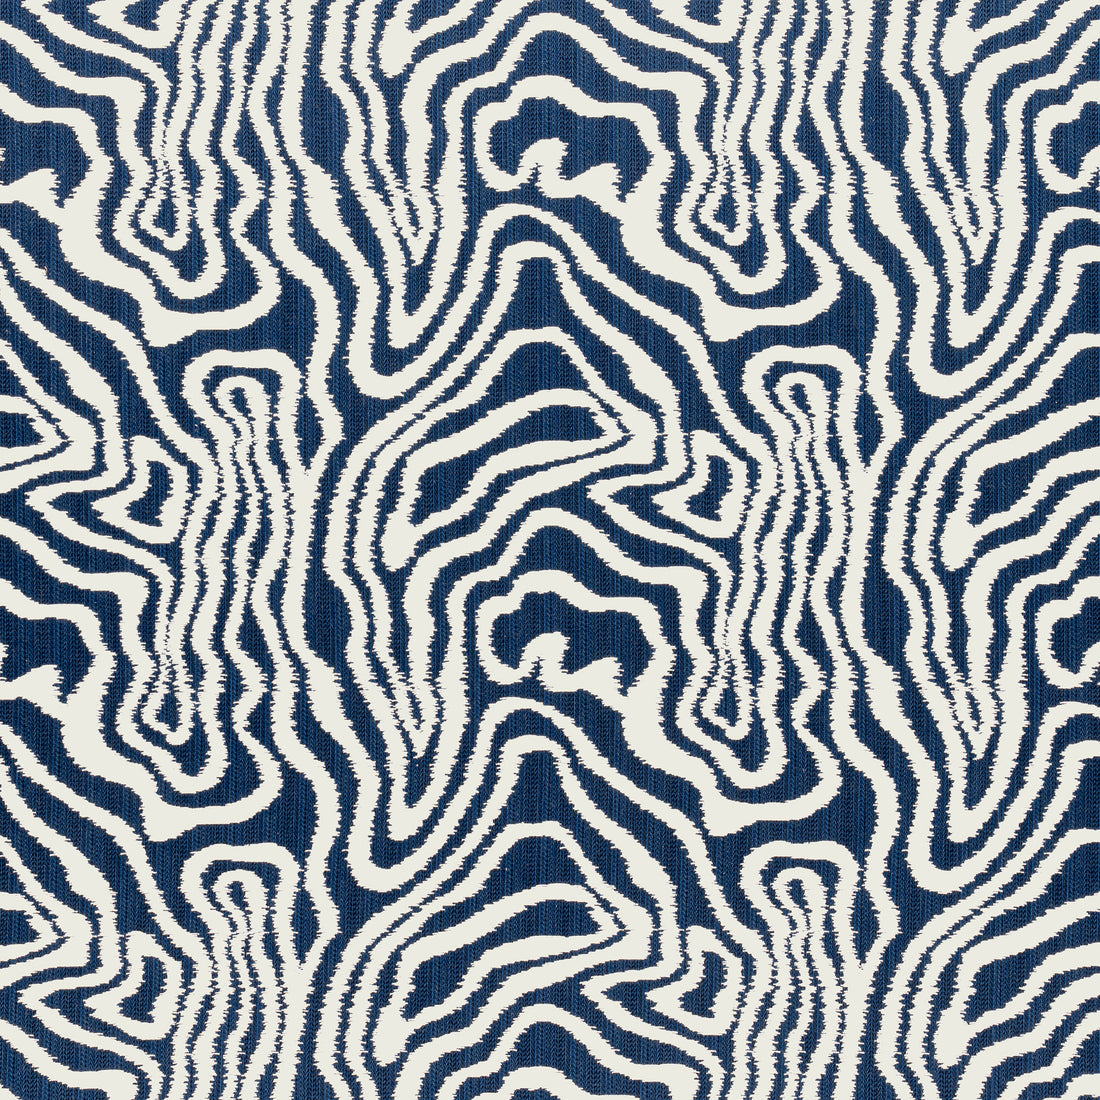 Alessandro fabric in navy - pattern number W713607 - by Thibaut in the Grand Palace collection